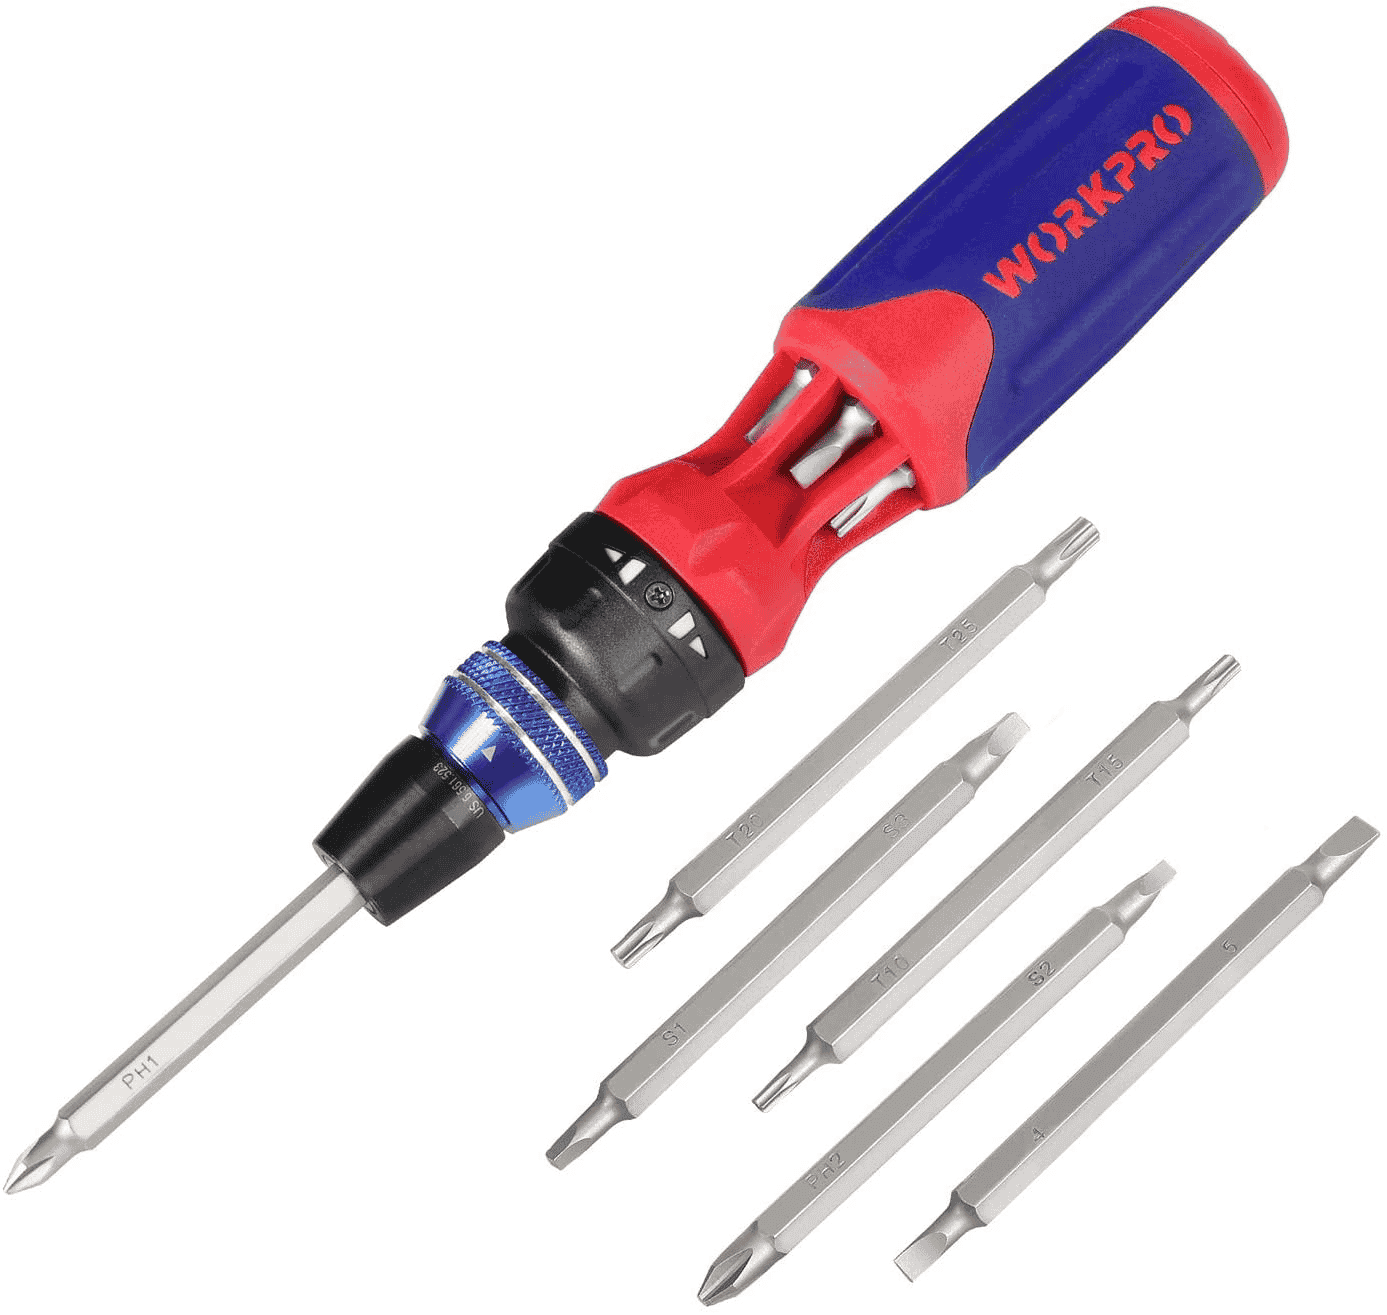 When fixing your mountain bike chain that is jumping gears you will need screwdrivers like these.